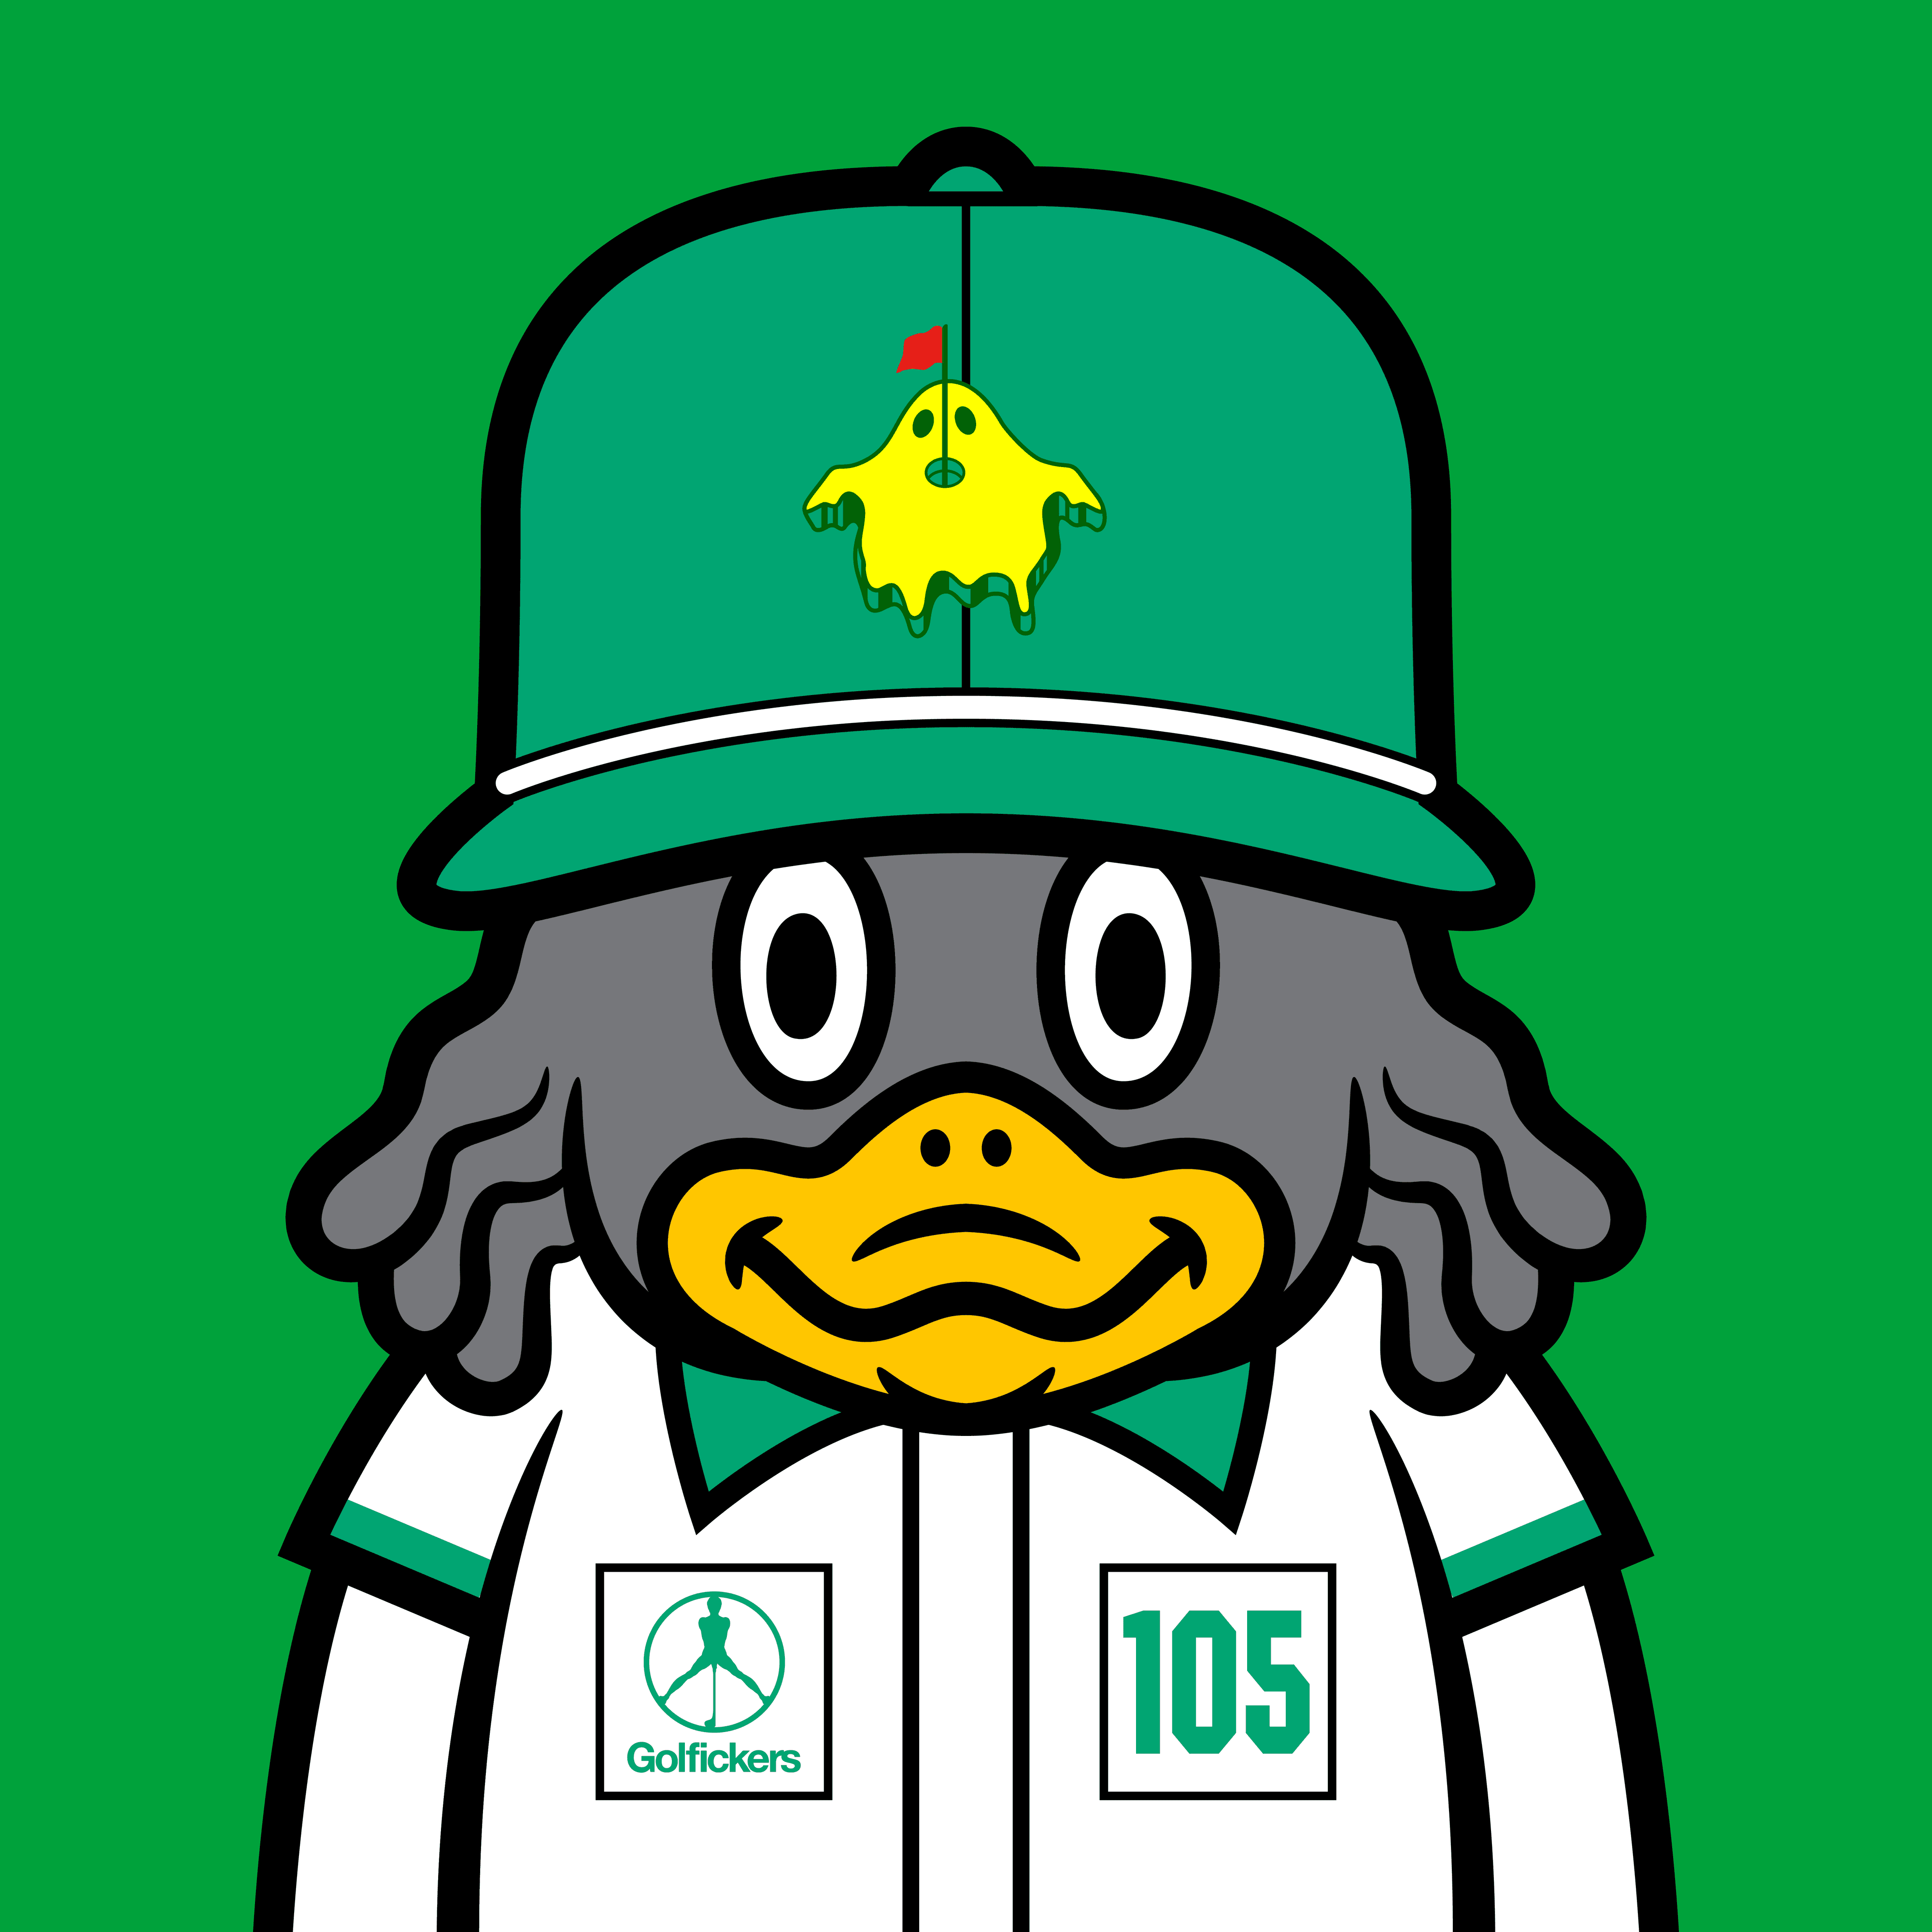 Golfickers The Duck #0105